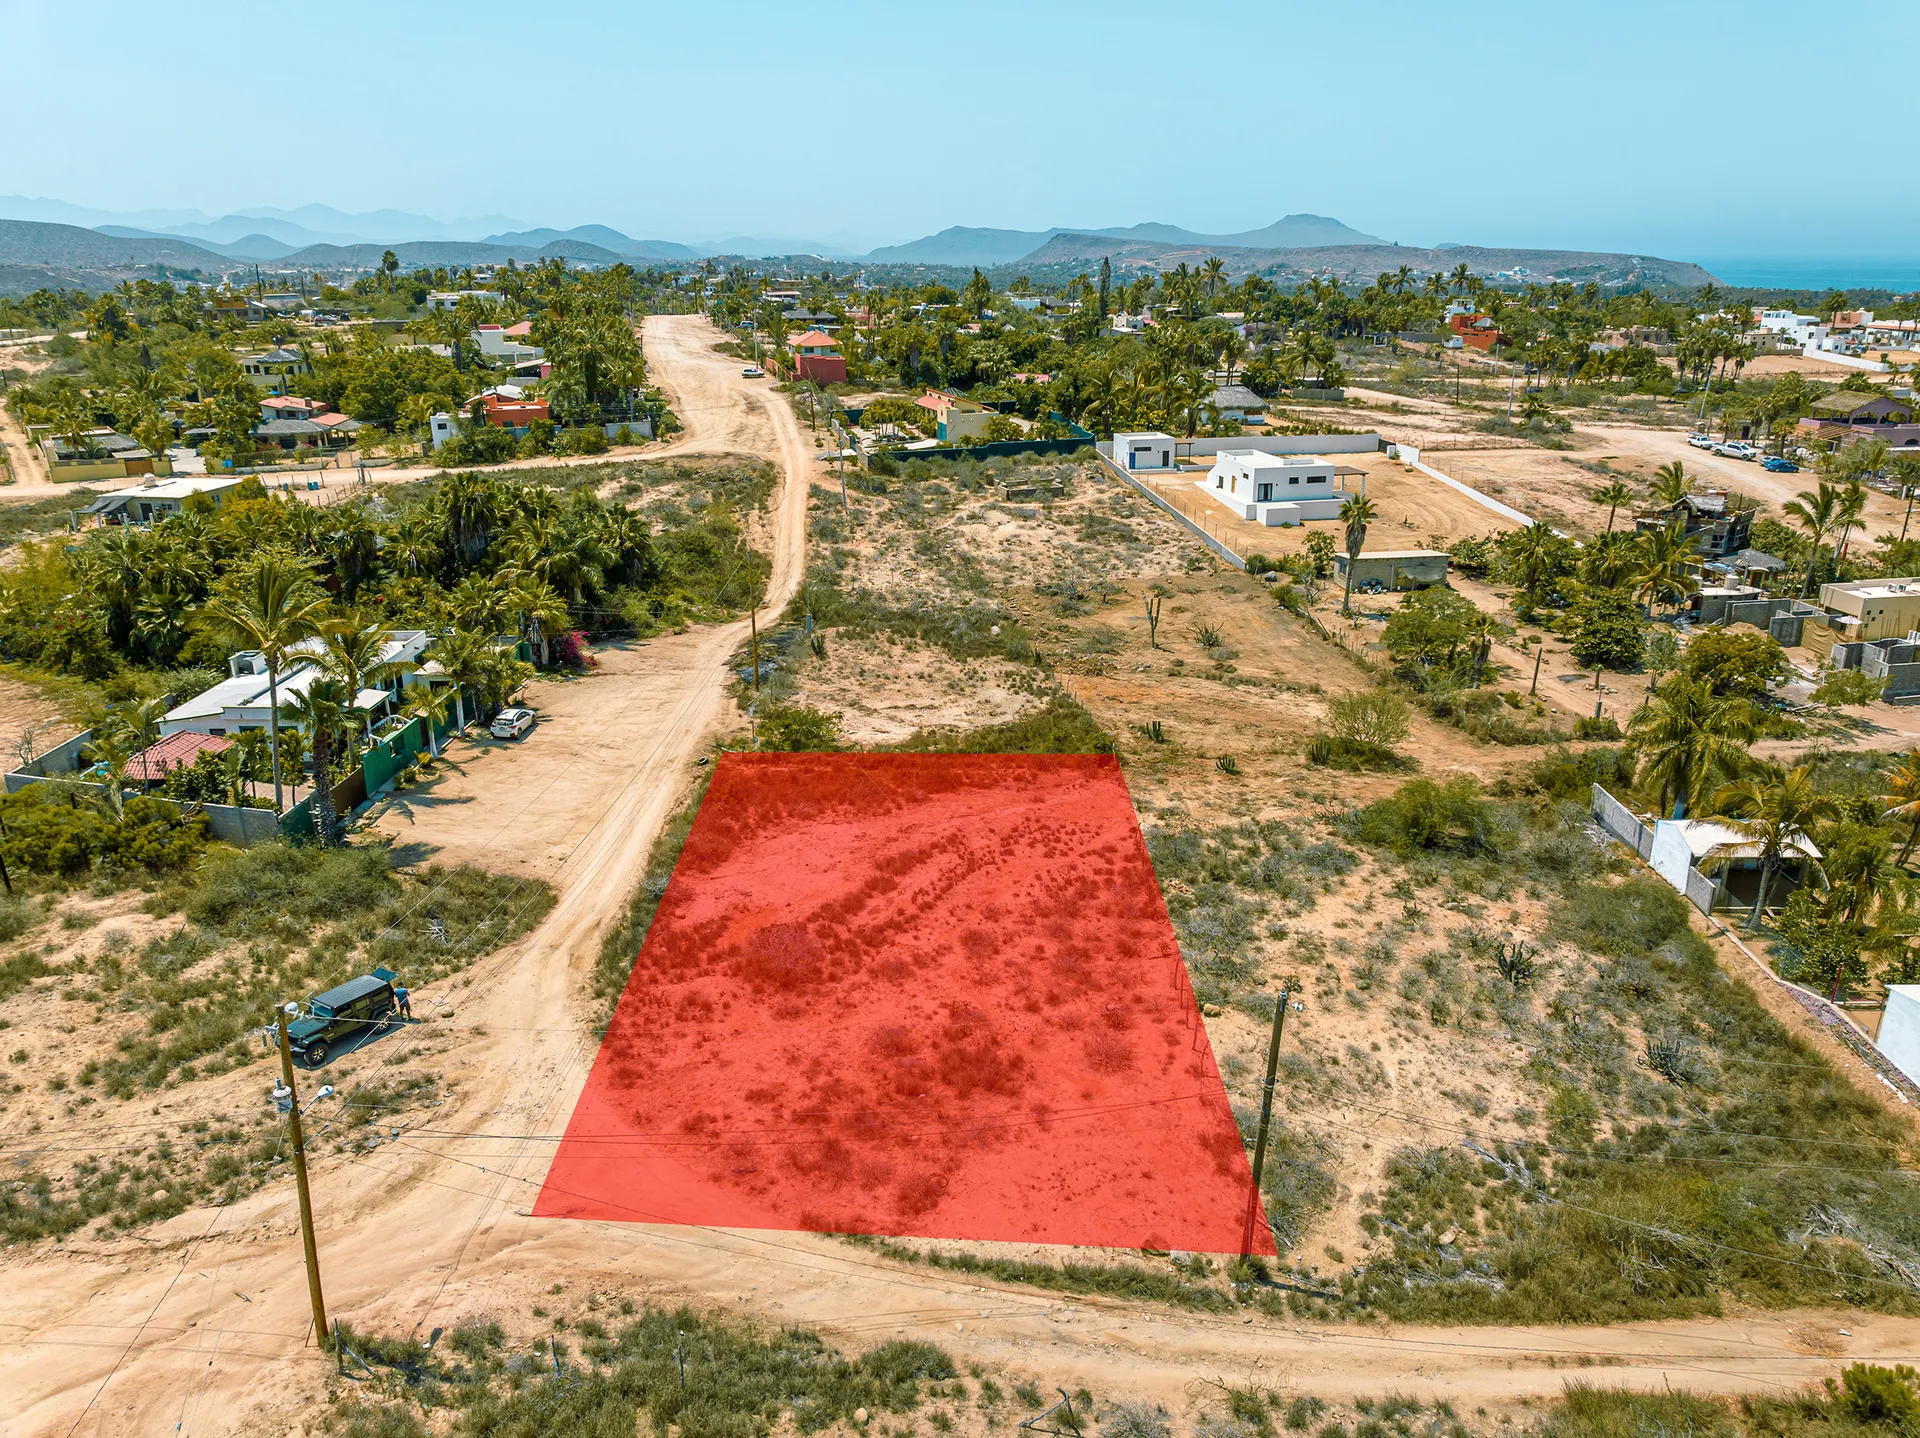 Situated in the highly coveted northeast region of Todos Santos, Lot 1 is a perfect property that offers a generous surface area of 1152.17 square meters.